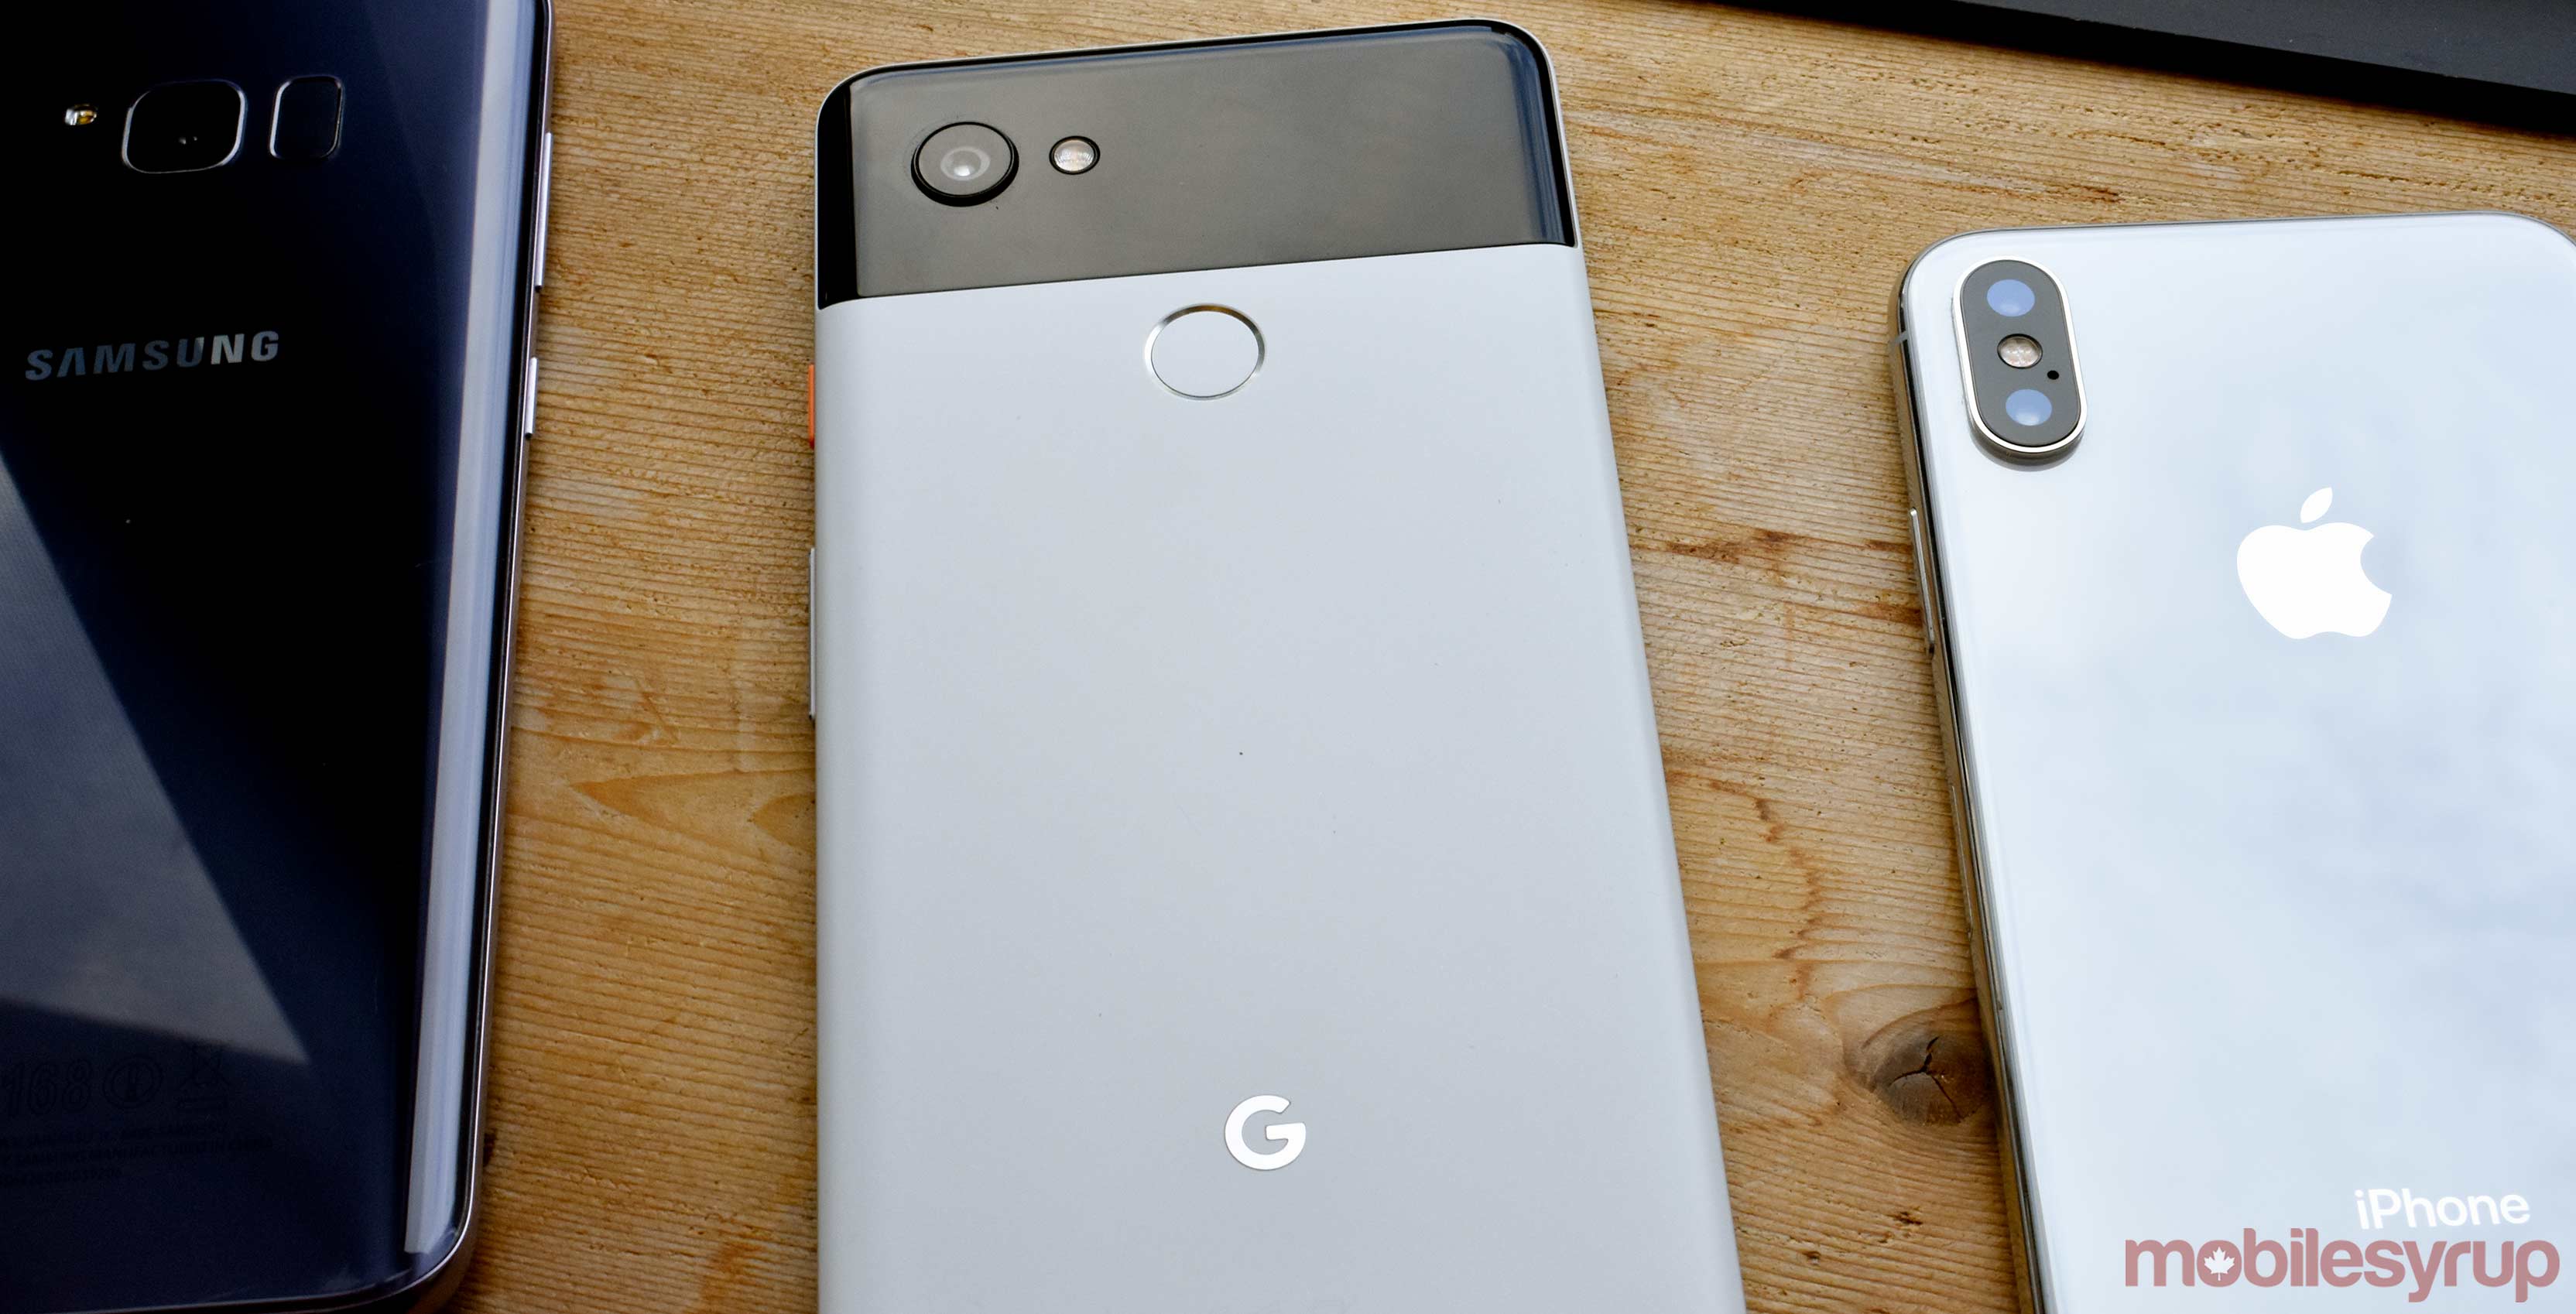 The Google Pixel 2 XL, Samsung S8 Plus and the iPhone X all beside one another